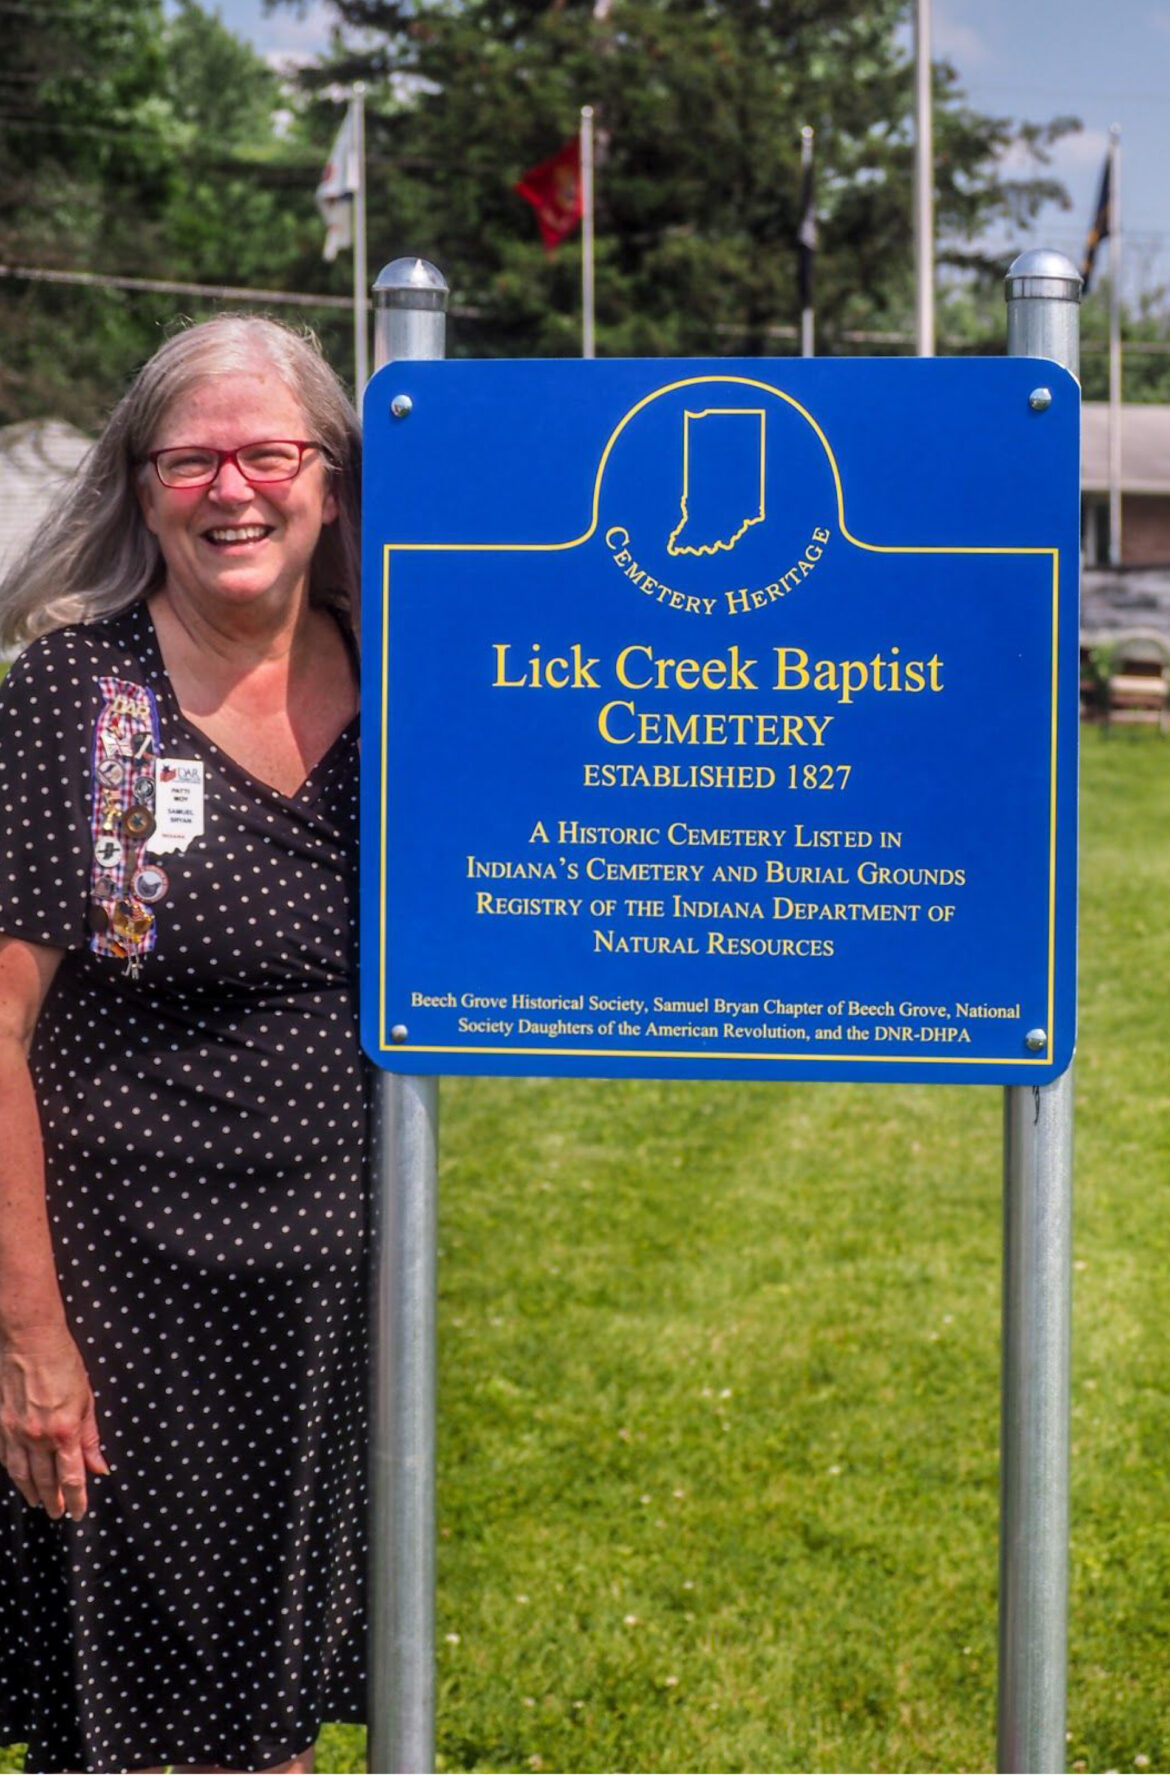 Beech Grove and DAR dedicate sign to Lick Creek Baptist Church and Cemetery